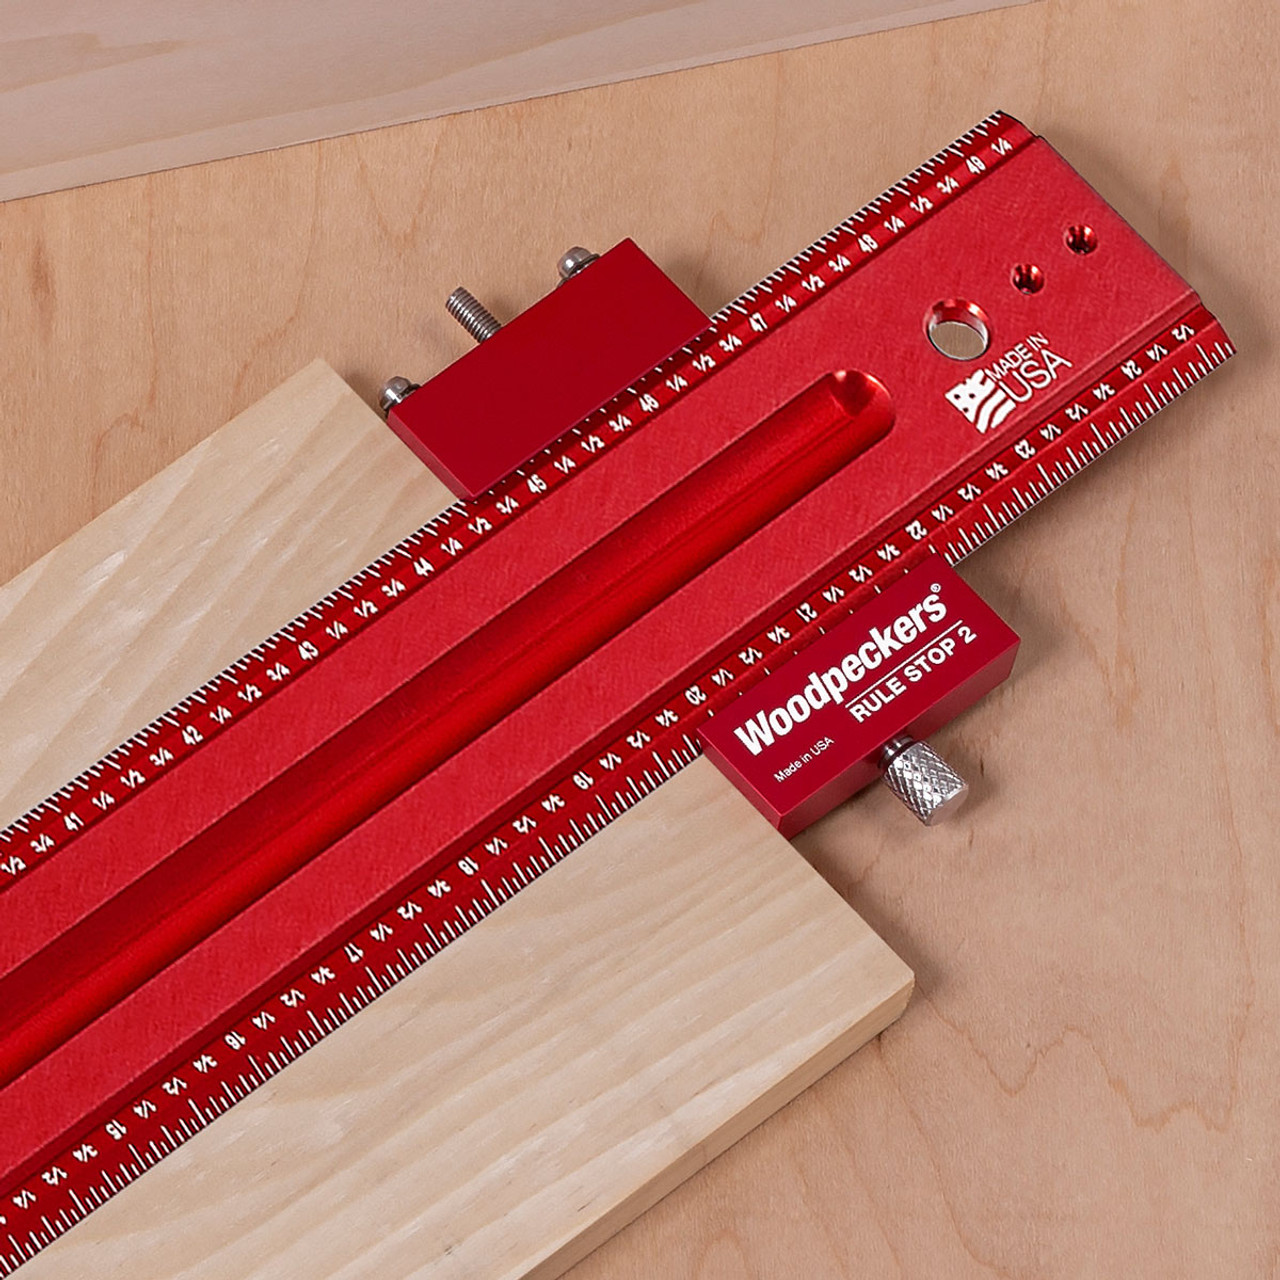 Woodpeckers - Time to post your redtool collection and use the  #redtoolwall. We will be drawing from all the posts @ #redtoolwall and  Facebook posts, on Wednesday! Do you really want to